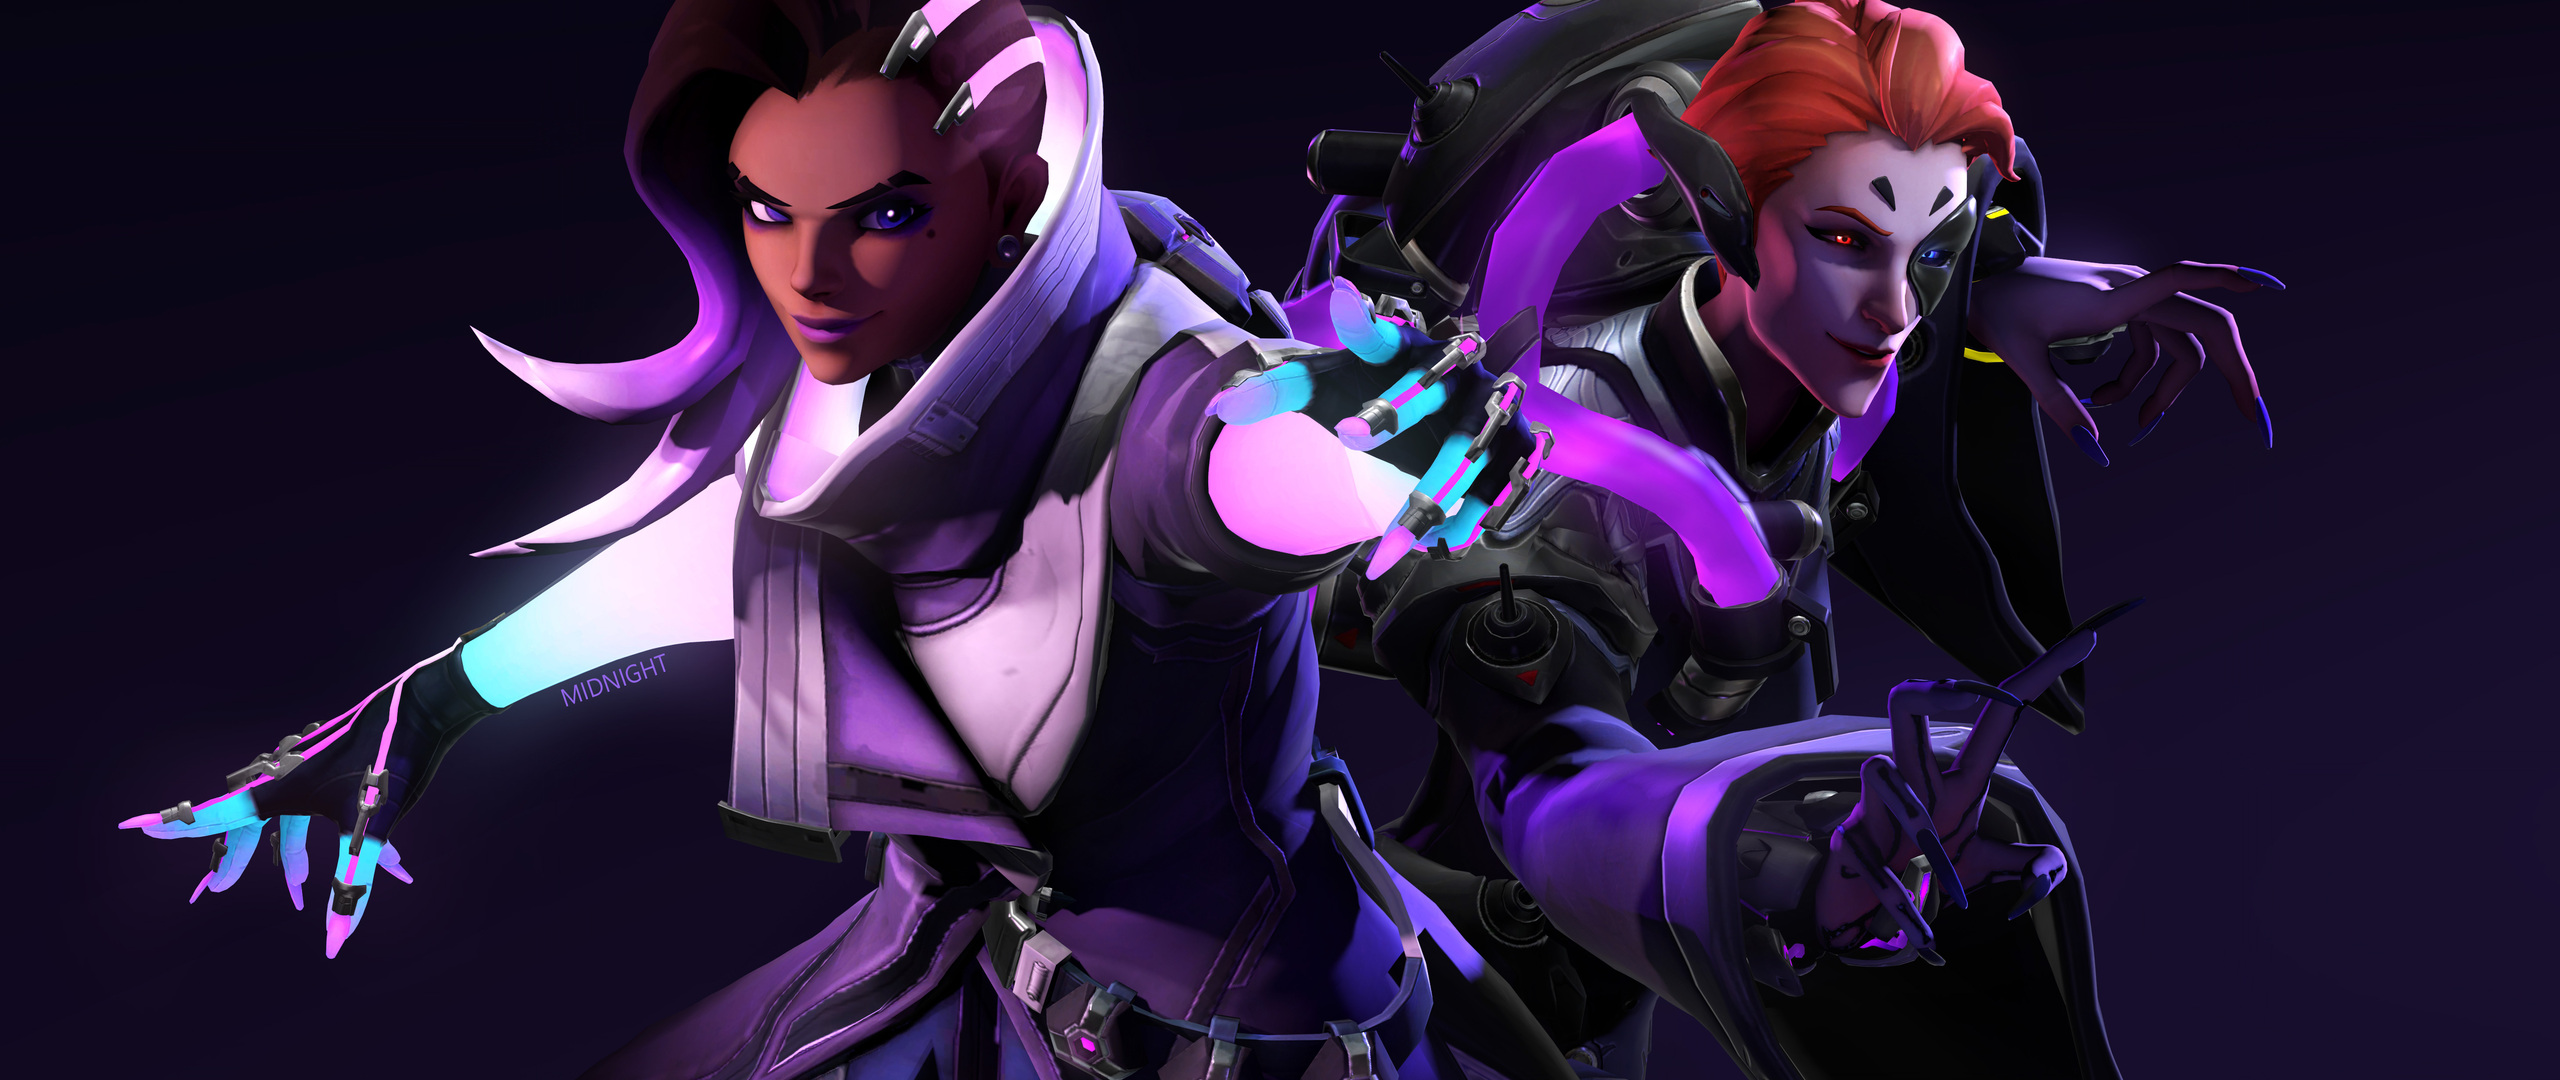 Sombra And Moira Overwatch 5k In 2560x1080 Resolution. sombra-and-moira-ove...